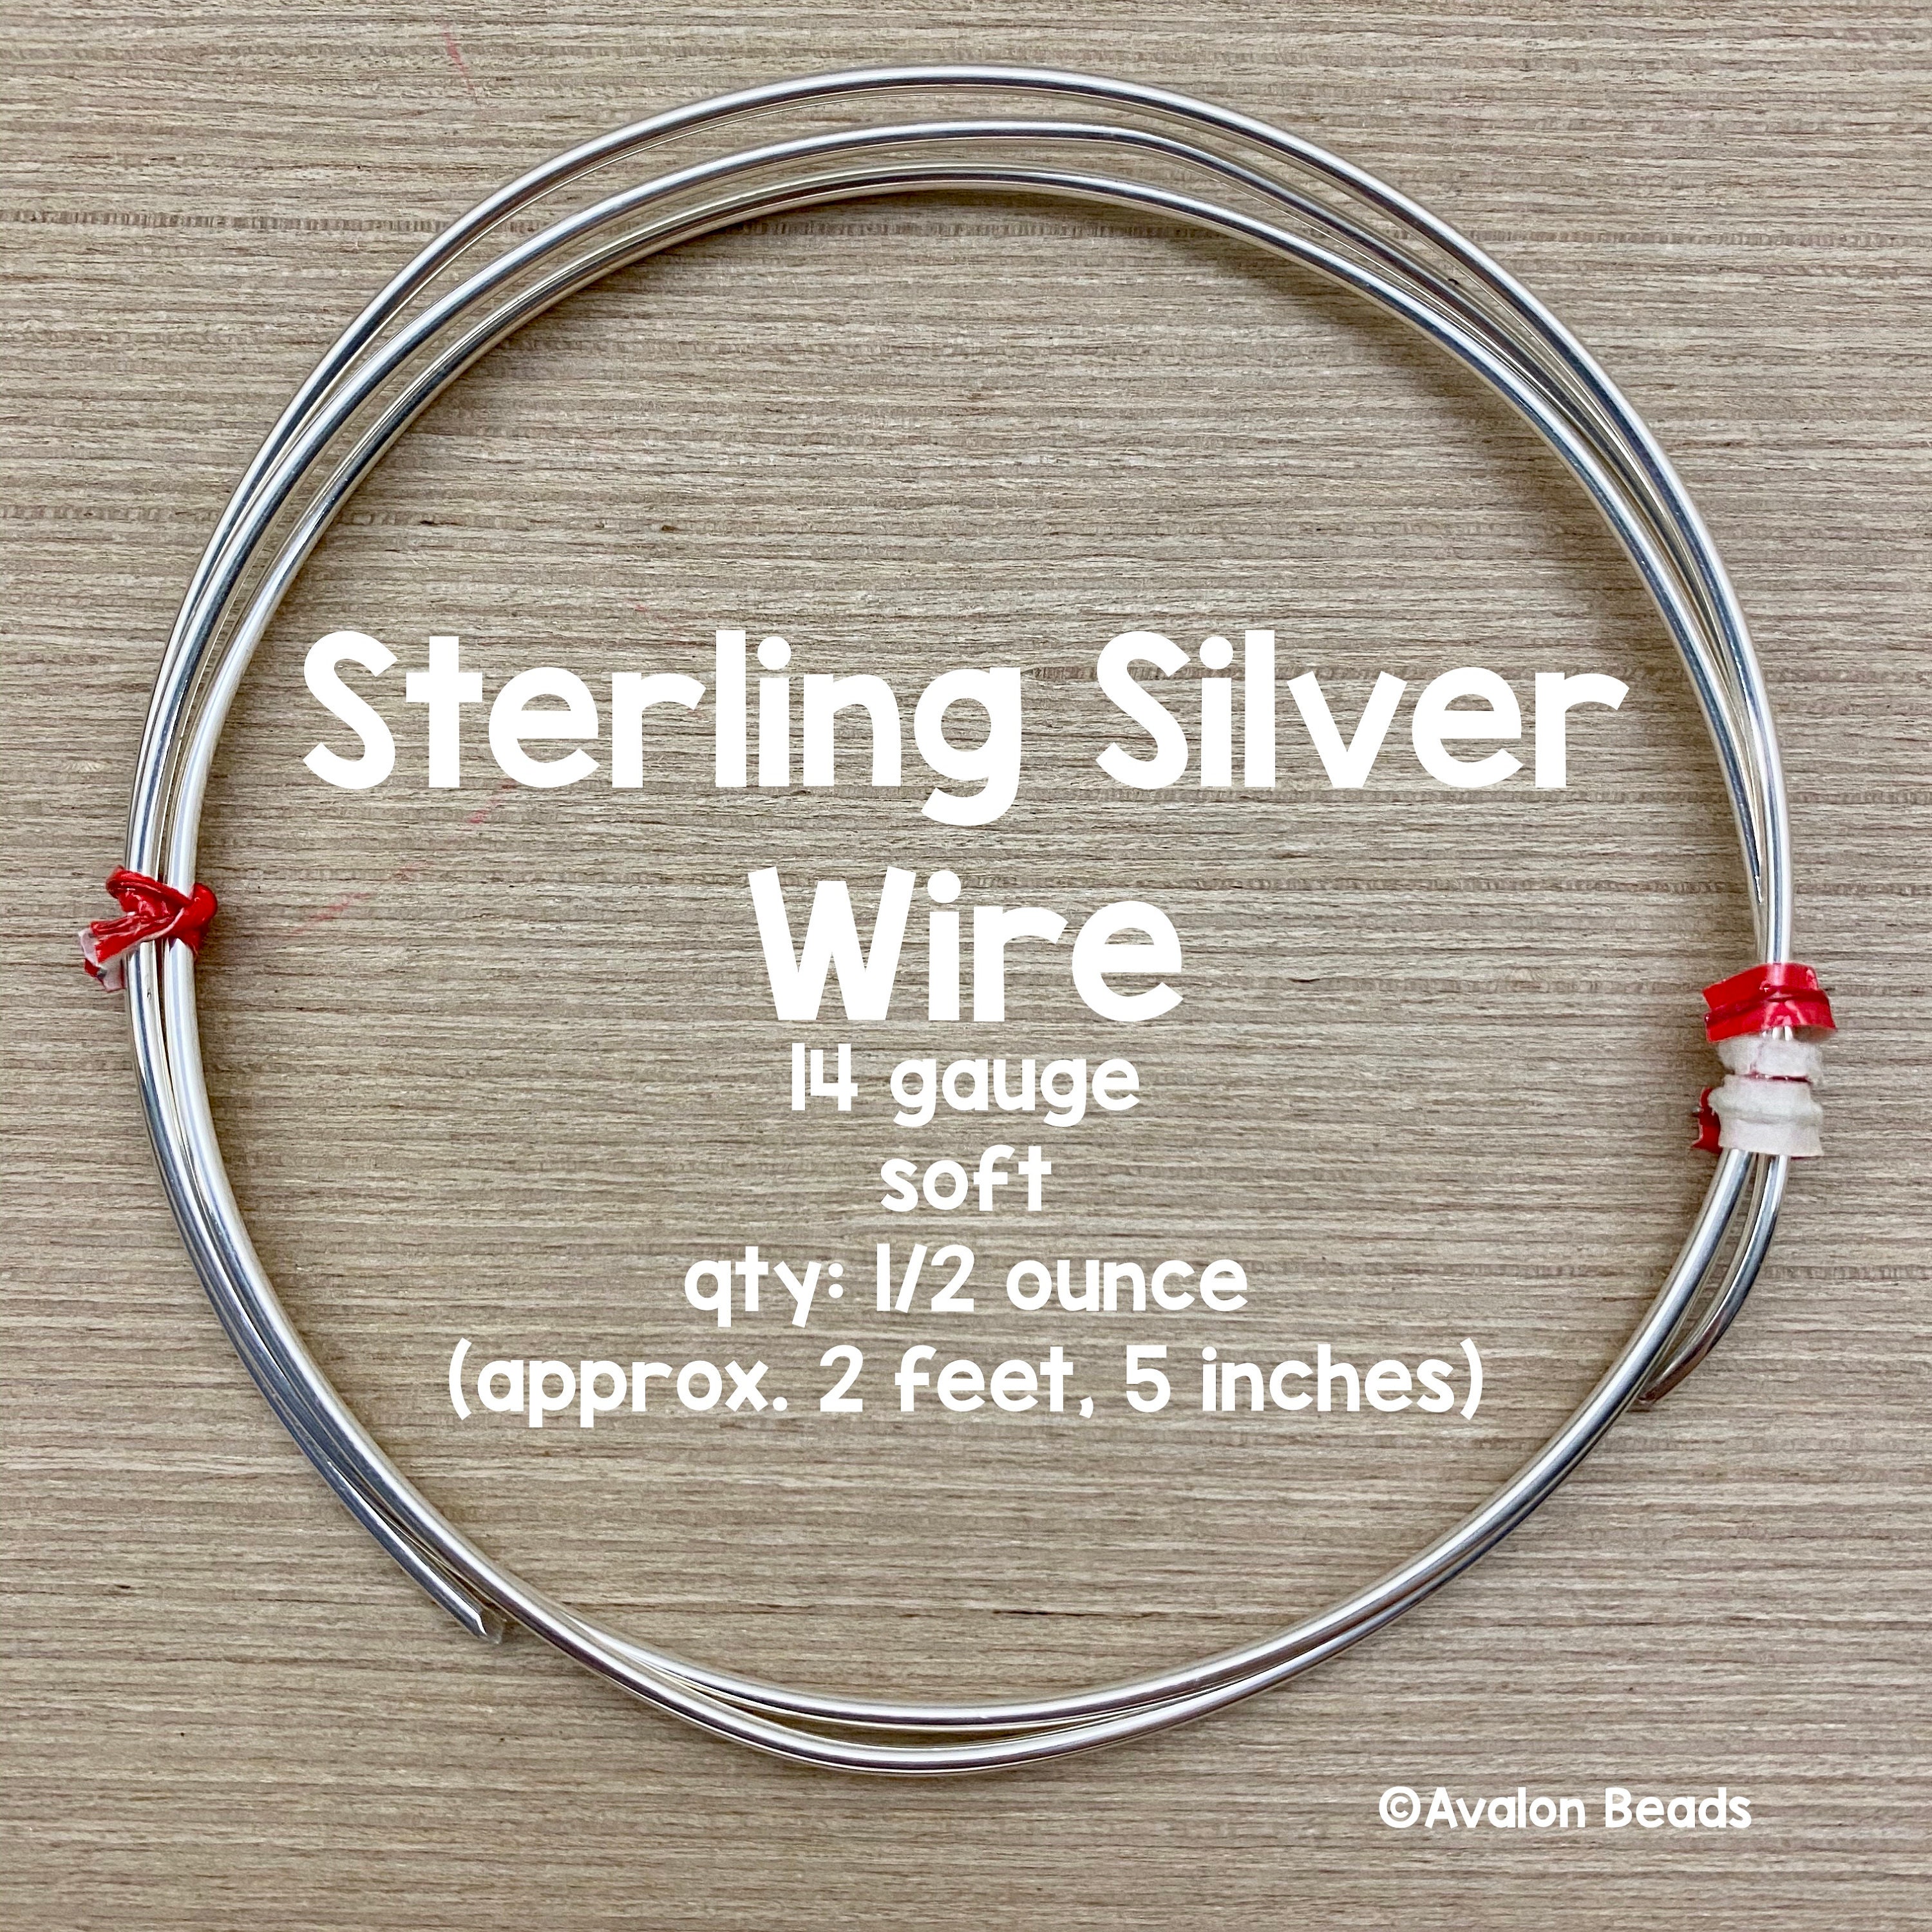 Soft 1 Ounce Sterling Silver Wire